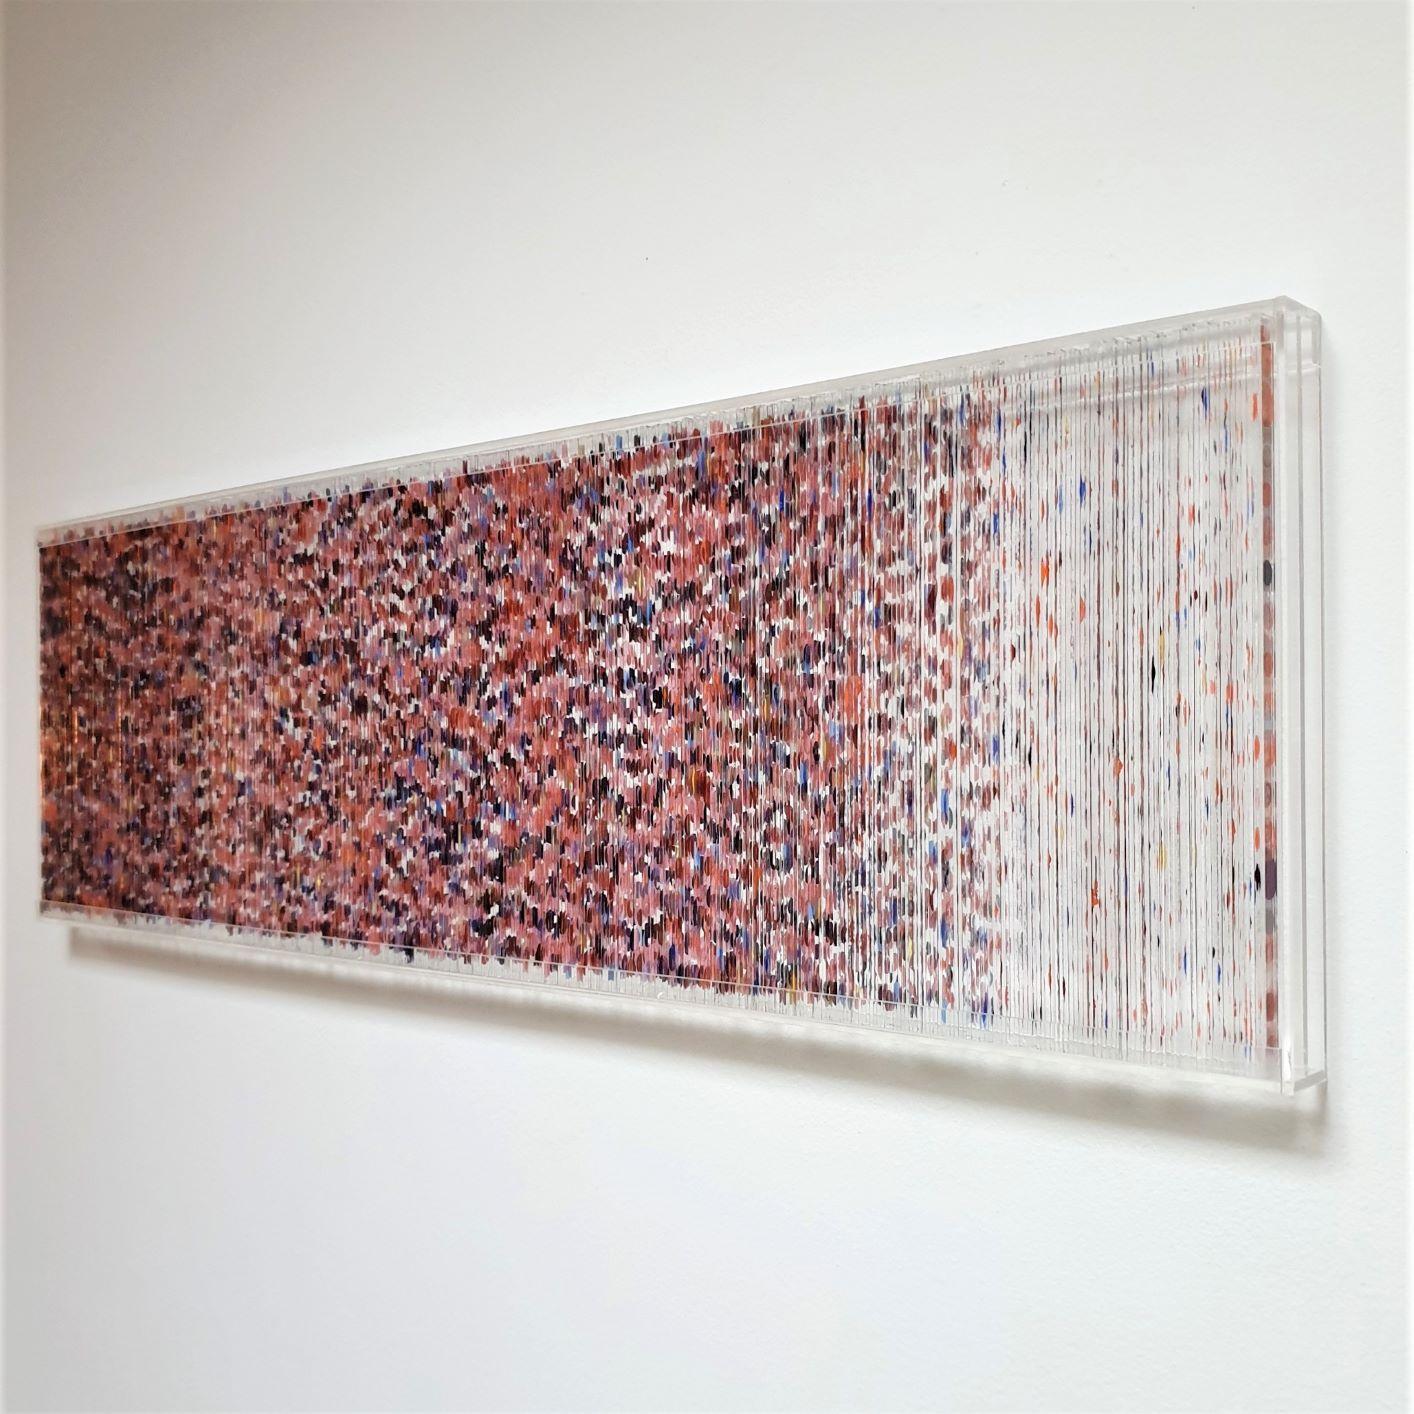 Farbenlichthaut no. 150 is a contemporary modern organic sculpture painting relief by German artist Freddie Michael Soethout. The relief is made from dozens of hand-cut two millimeter thick glass strips covered with a multicoloured dotted organic